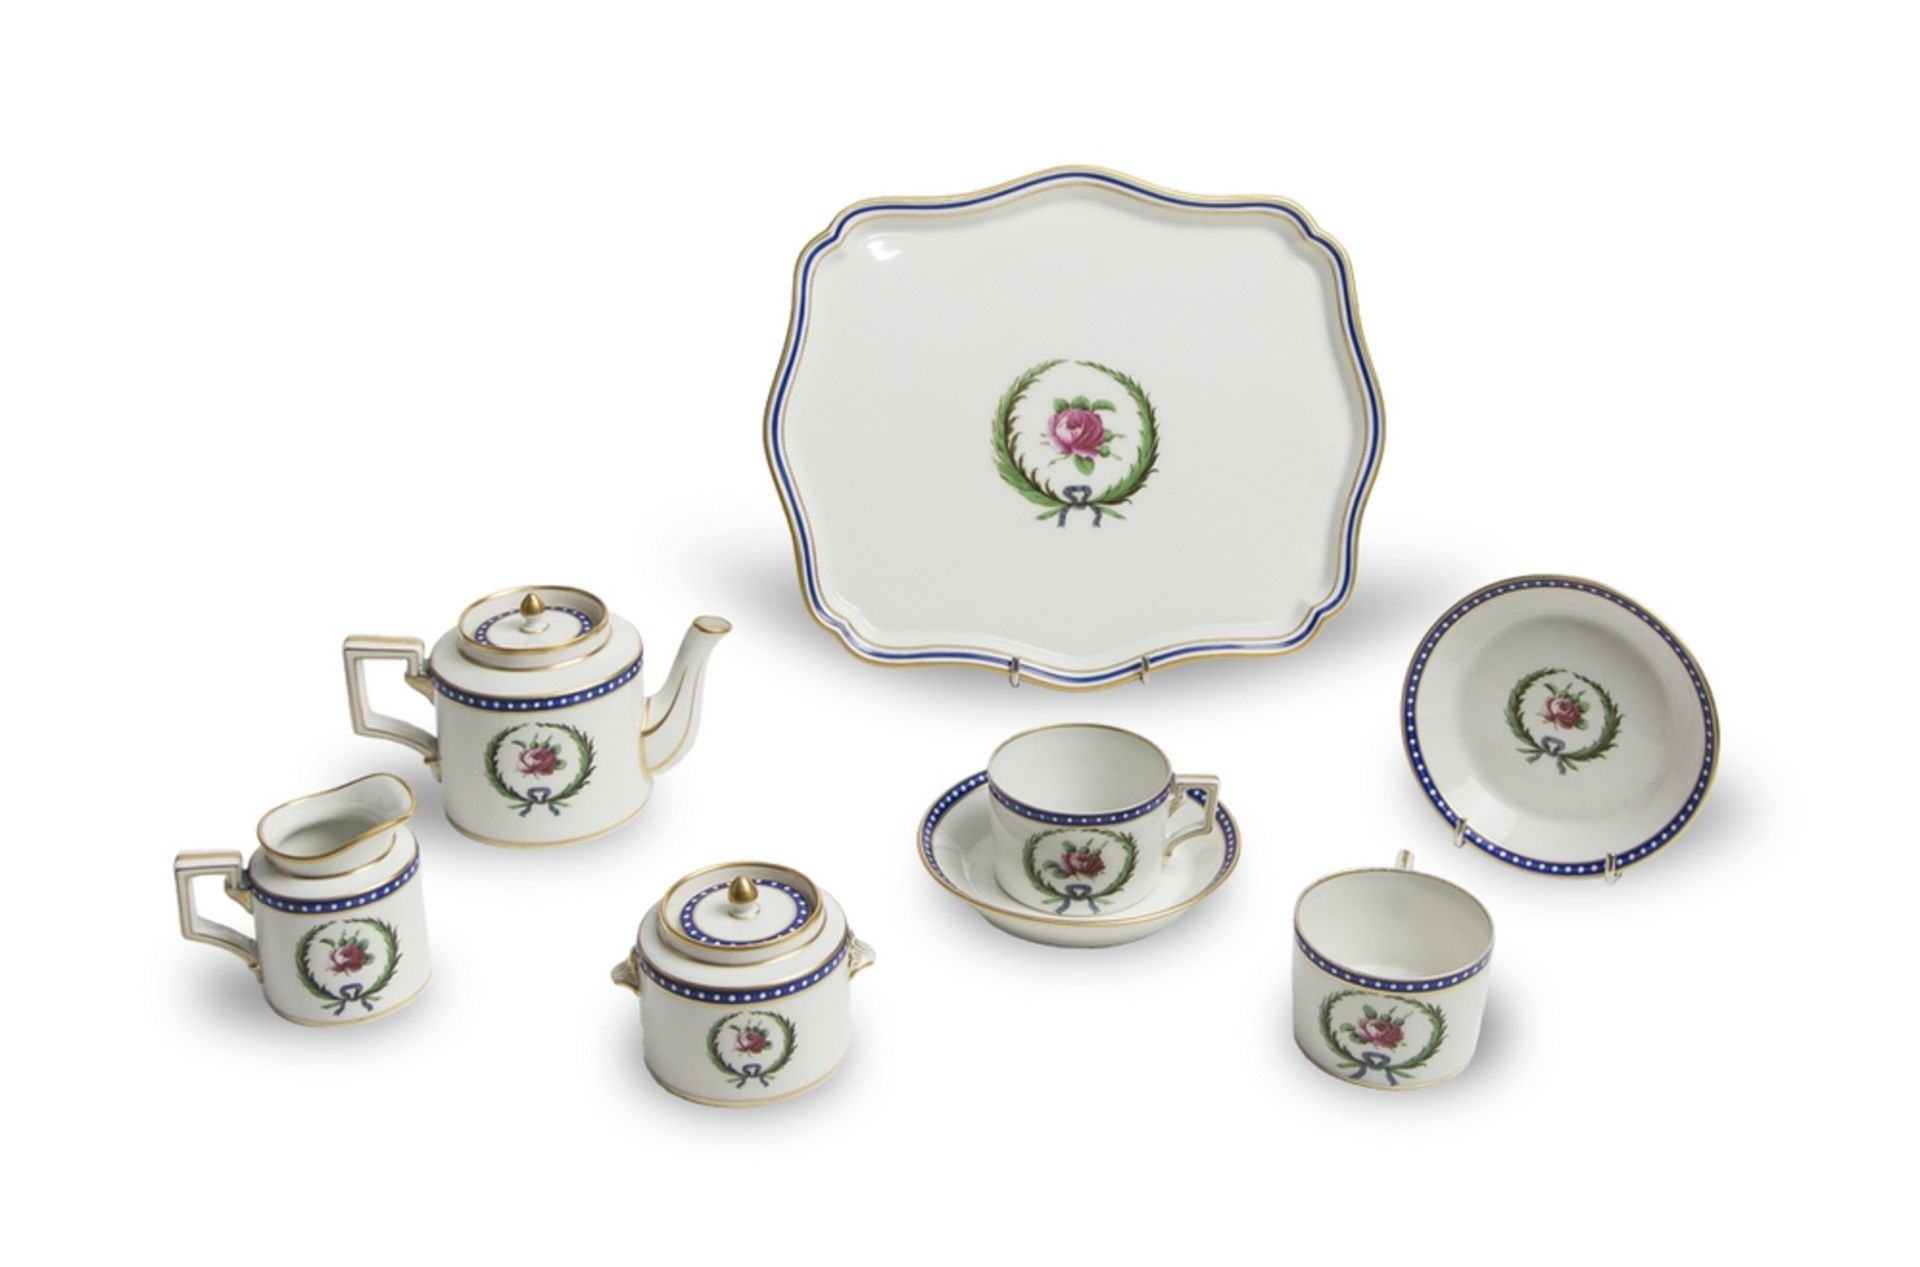 TEA SERVICE IN PORCELAIN, RICHARD GINORI EARLY 20TH CENTURY in white, cobalt and gold enamel with